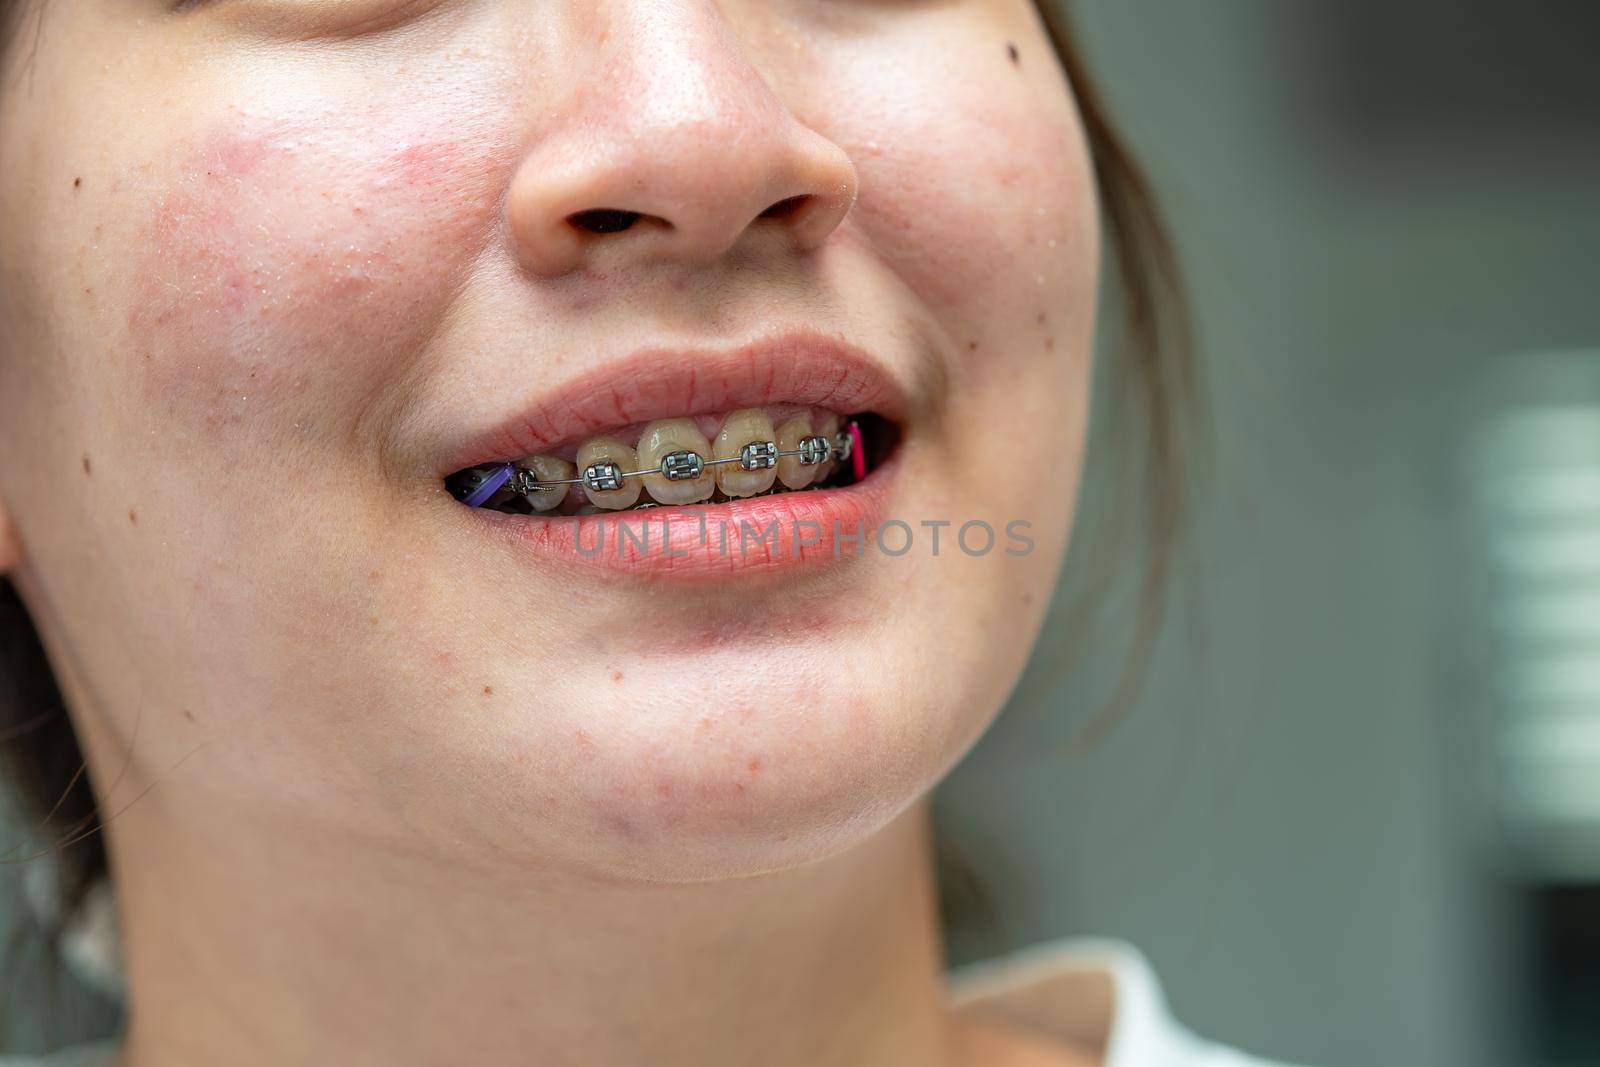 Braces in teenage girl mouth to treat and beauty for increase confidence and good personality. by pamai